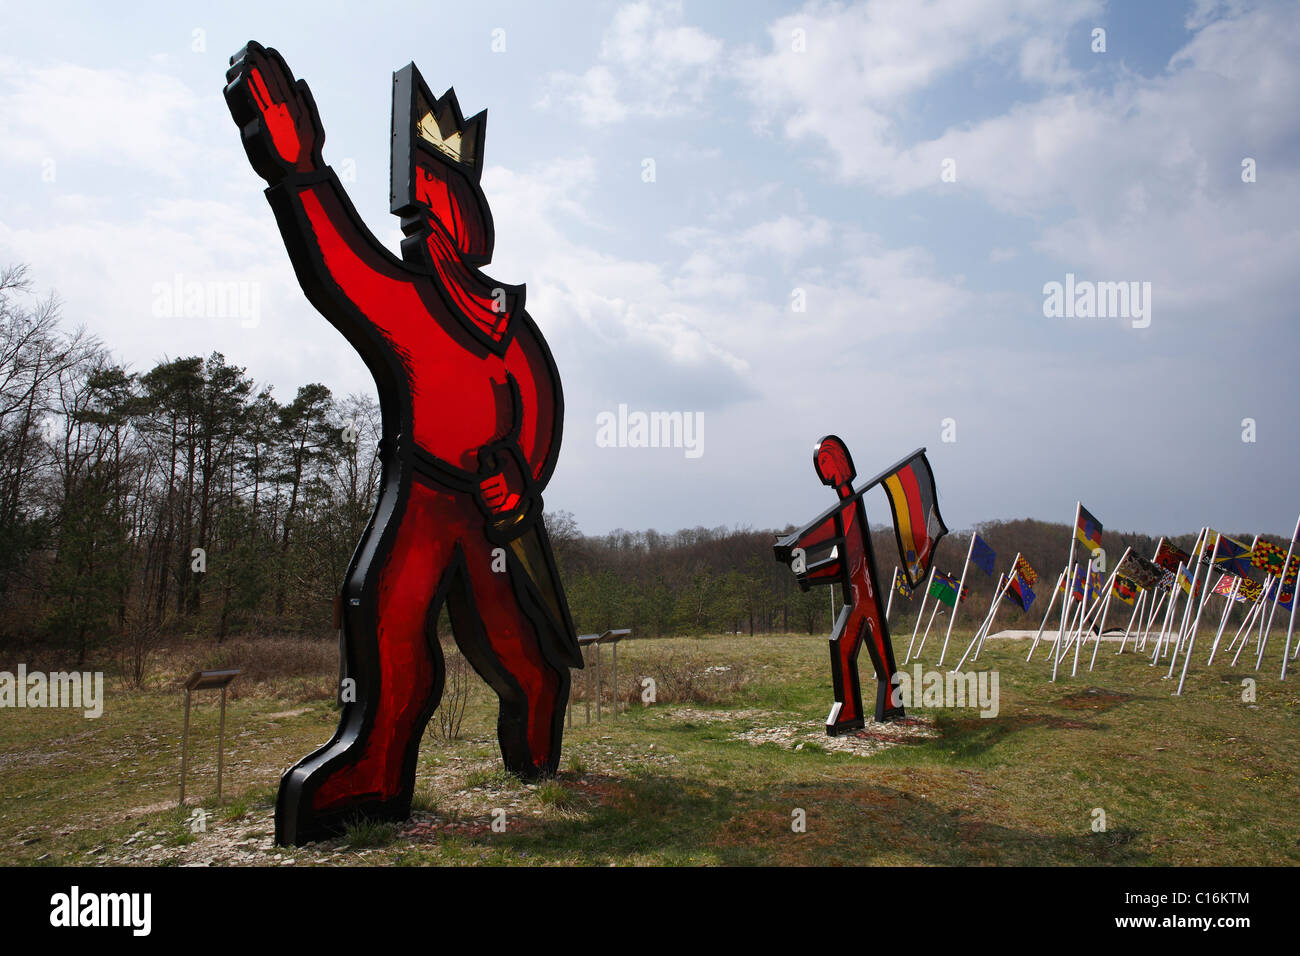 "Barbarossa" work of art by Herbert Fell, "Sculpture park" national monument to German unity on the Thuringian/Bavarian border Stock Photo